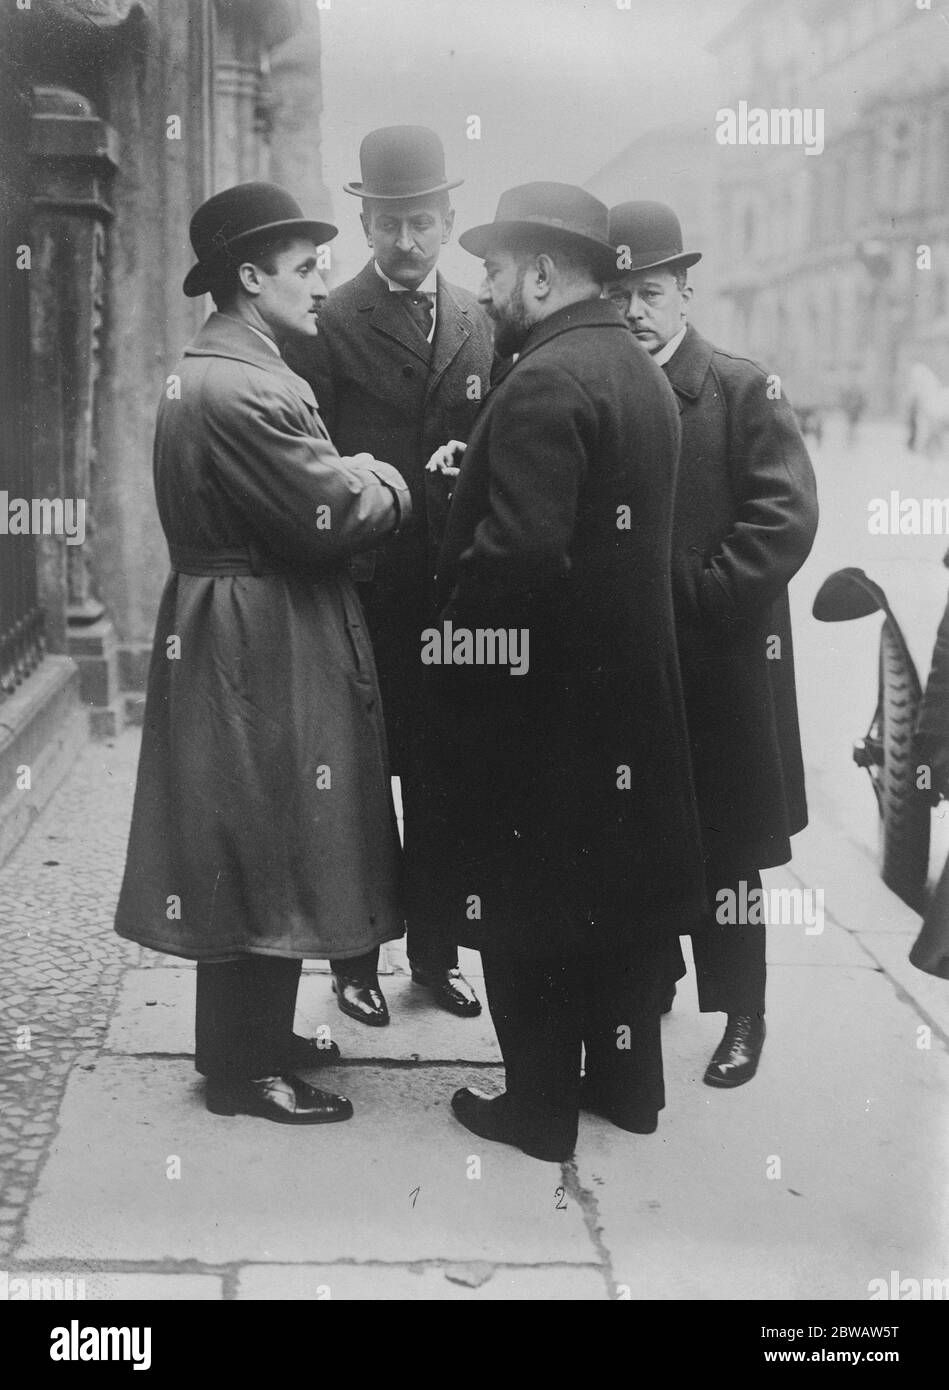 Hugo Stinnes discusses the restoration of devastated French areas . Hugo Stinnes ( 12 February 1870 - 10 April 1924 ) was a German industrialist and politician The French Senator , Marquis de Lubersac ( second from left ) and Herr Hugo Stinnes ( foreground ) at their first meeting after the Marquis 's arrival in Berlin to discuss the carrying out of the agreement regarding the restoration of devastated areas in France . 21 October 1922 Stock Photo